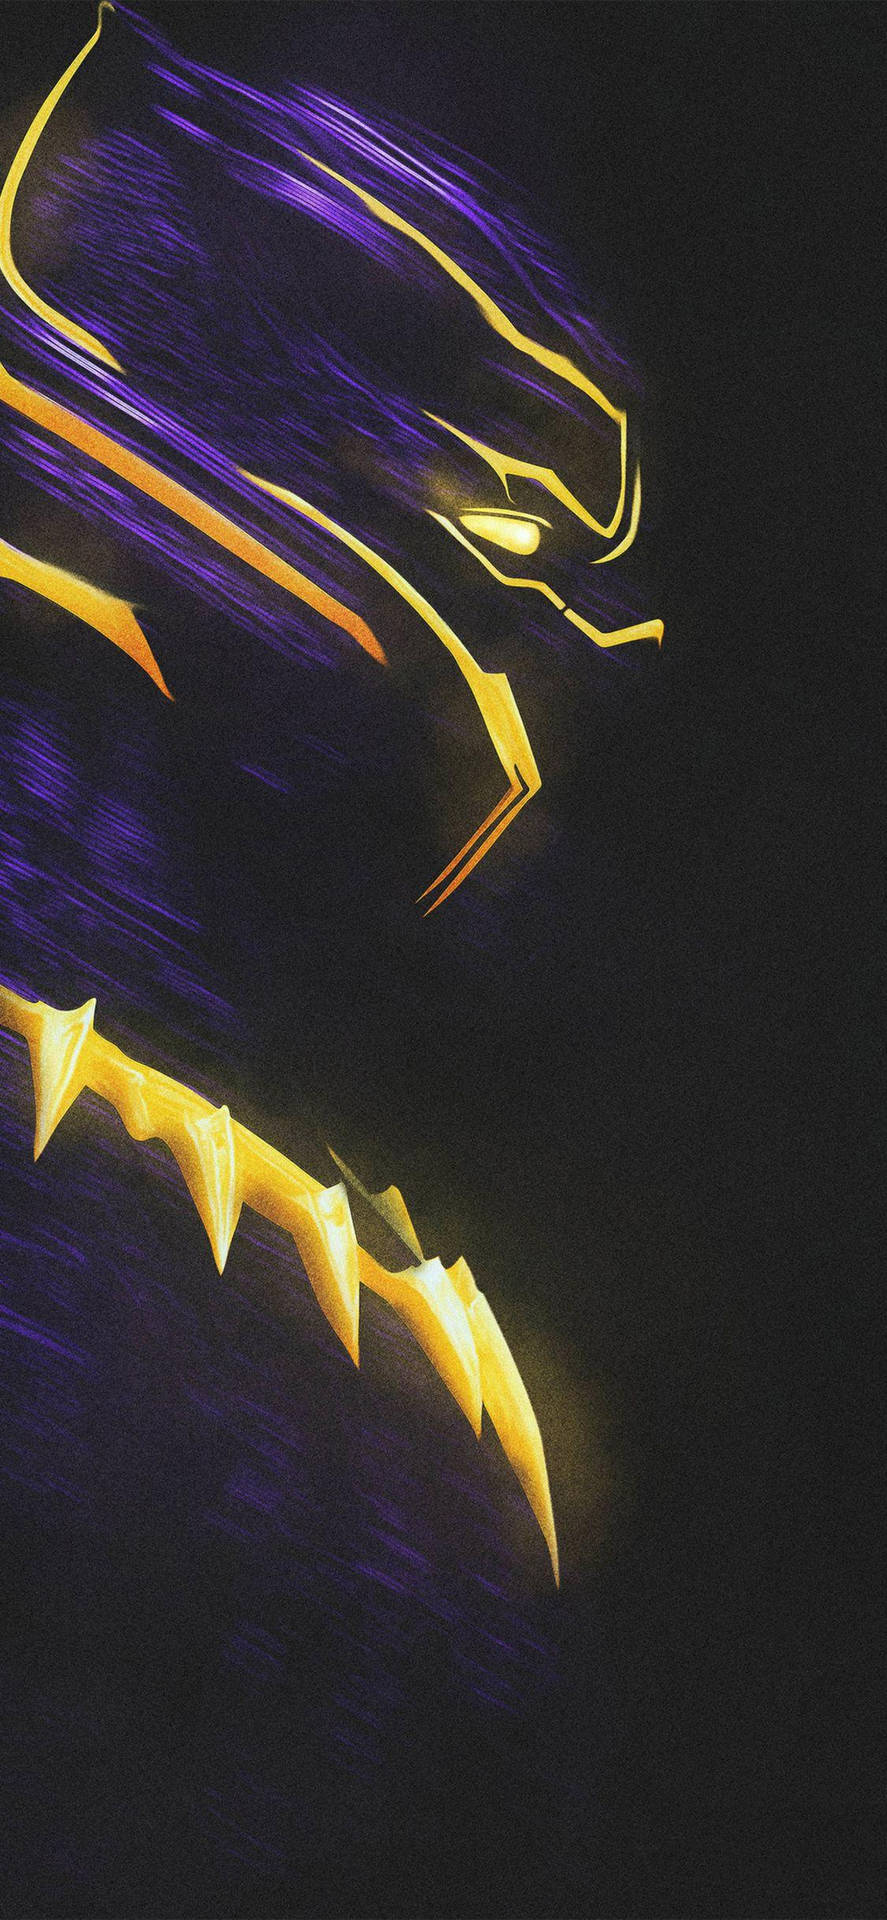 Black Panther Yellow Electric Marvel Iphone X Wallpaper